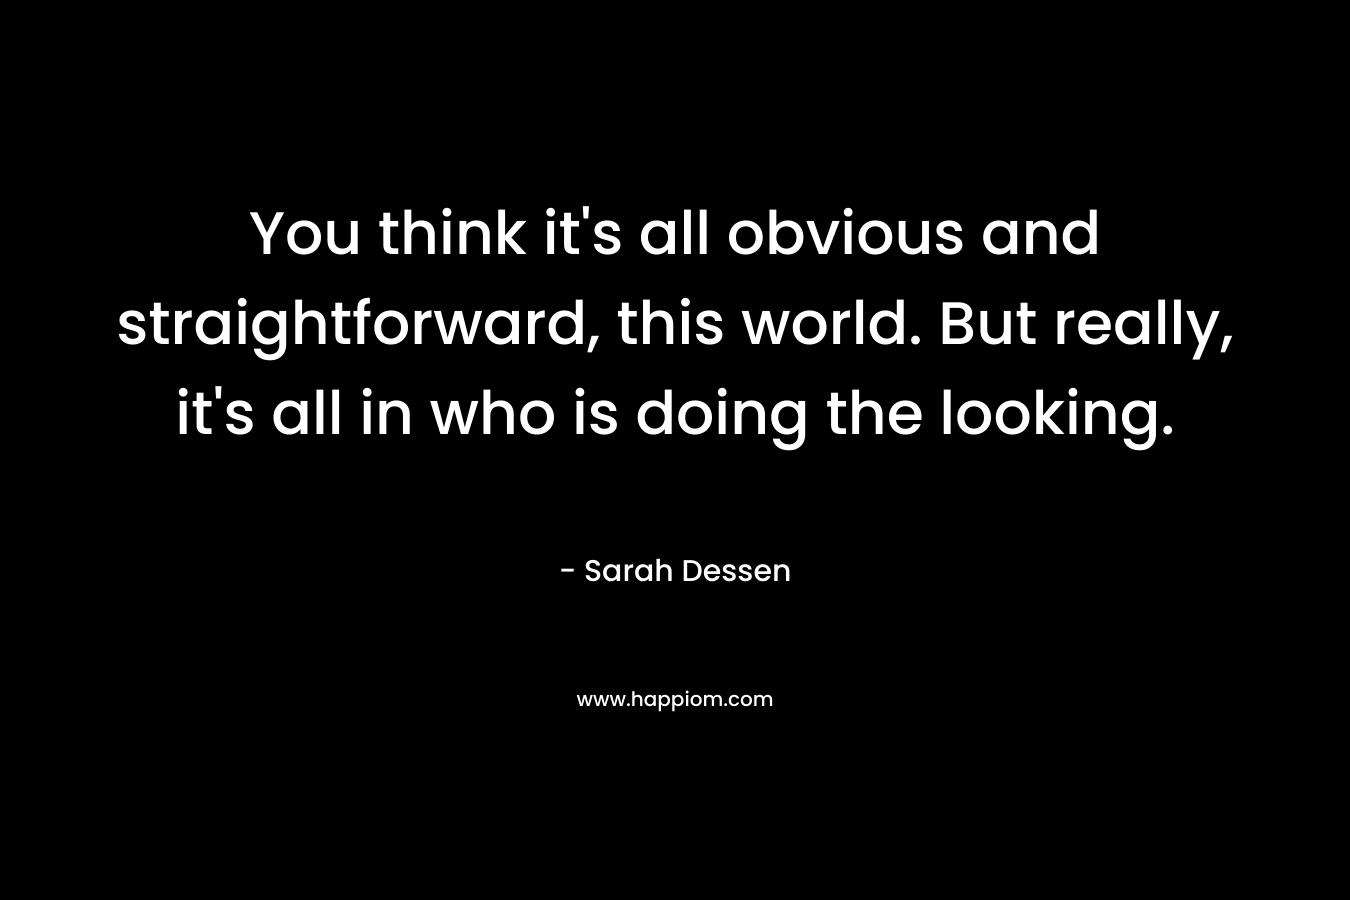 You think it’s all obvious and straightforward, this world. But really, it’s all in who is doing the looking. – Sarah Dessen